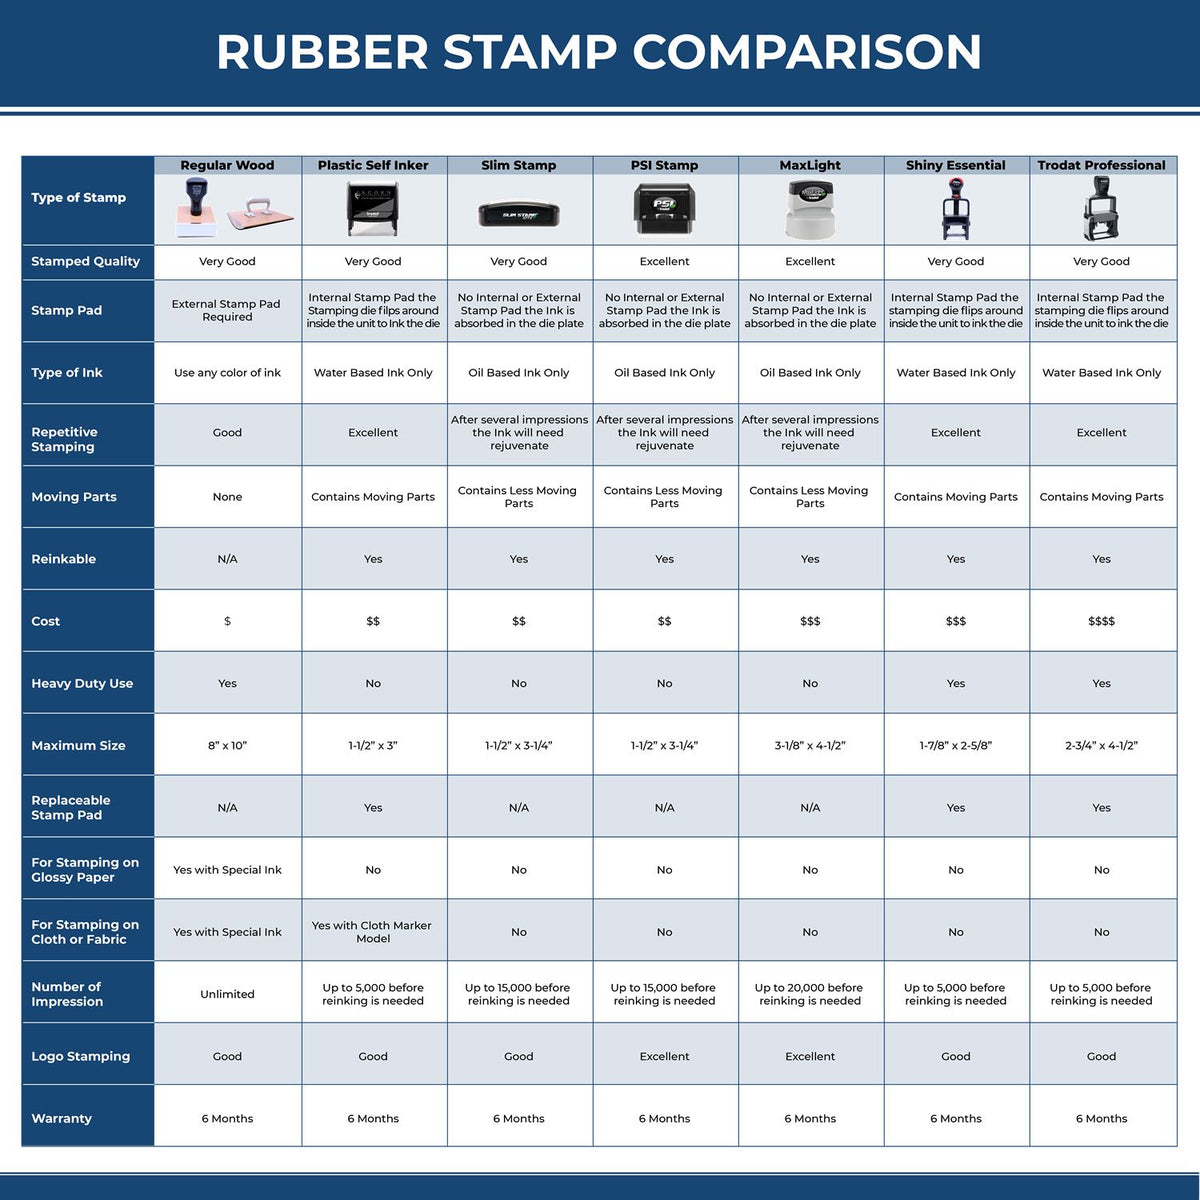 Large Self Inking Credit Stamp 4117S Rubber Stamp Comparison